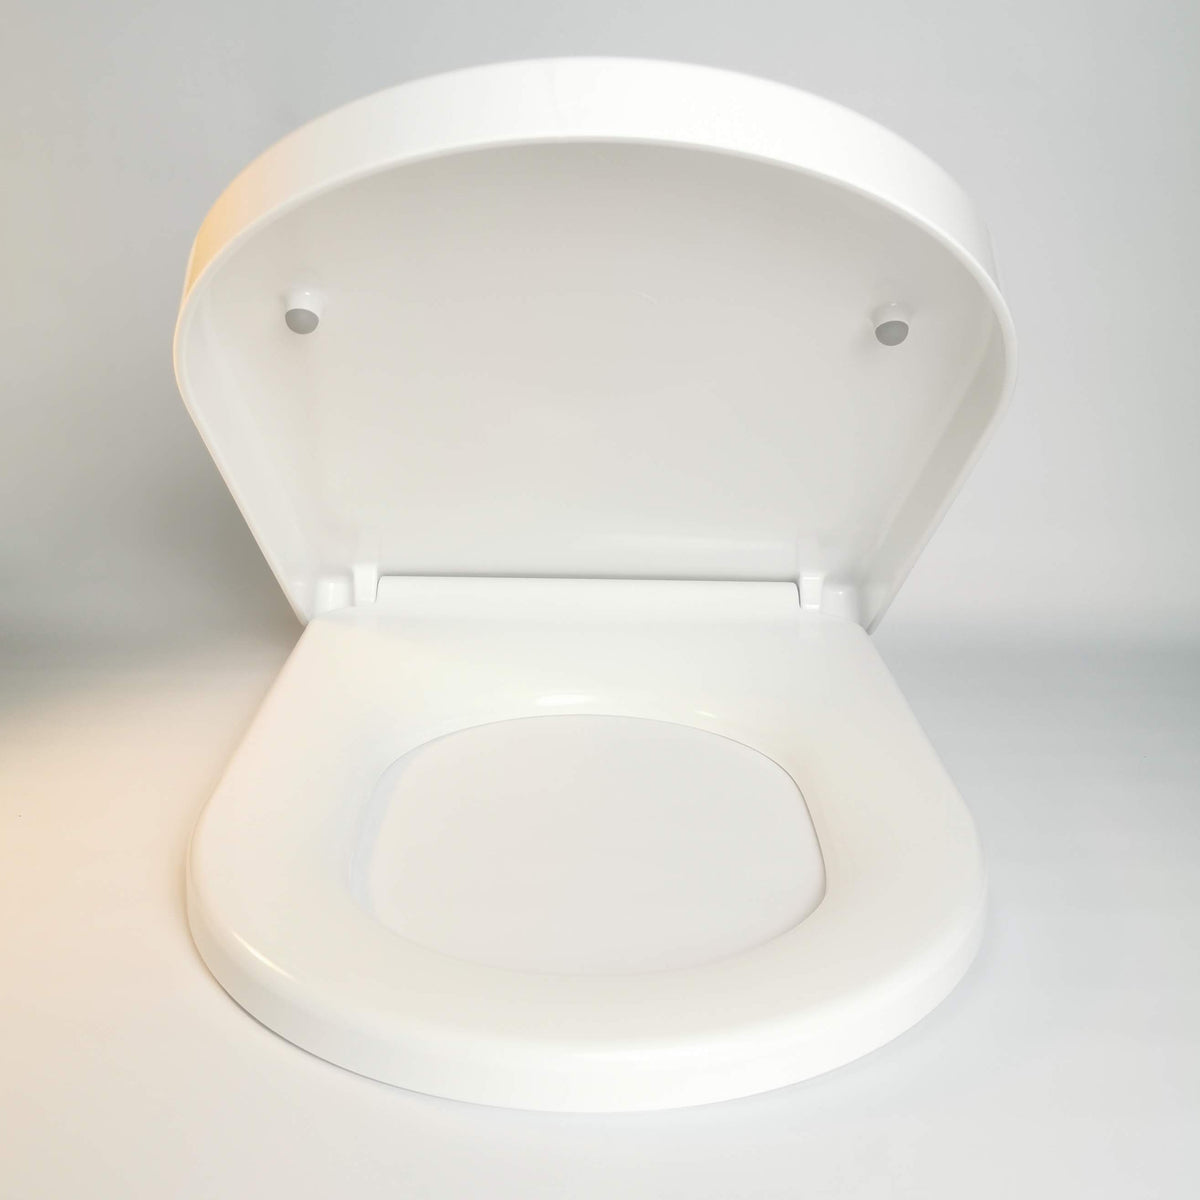 Thick Seat Cover - Toilet Seat - Gloss White